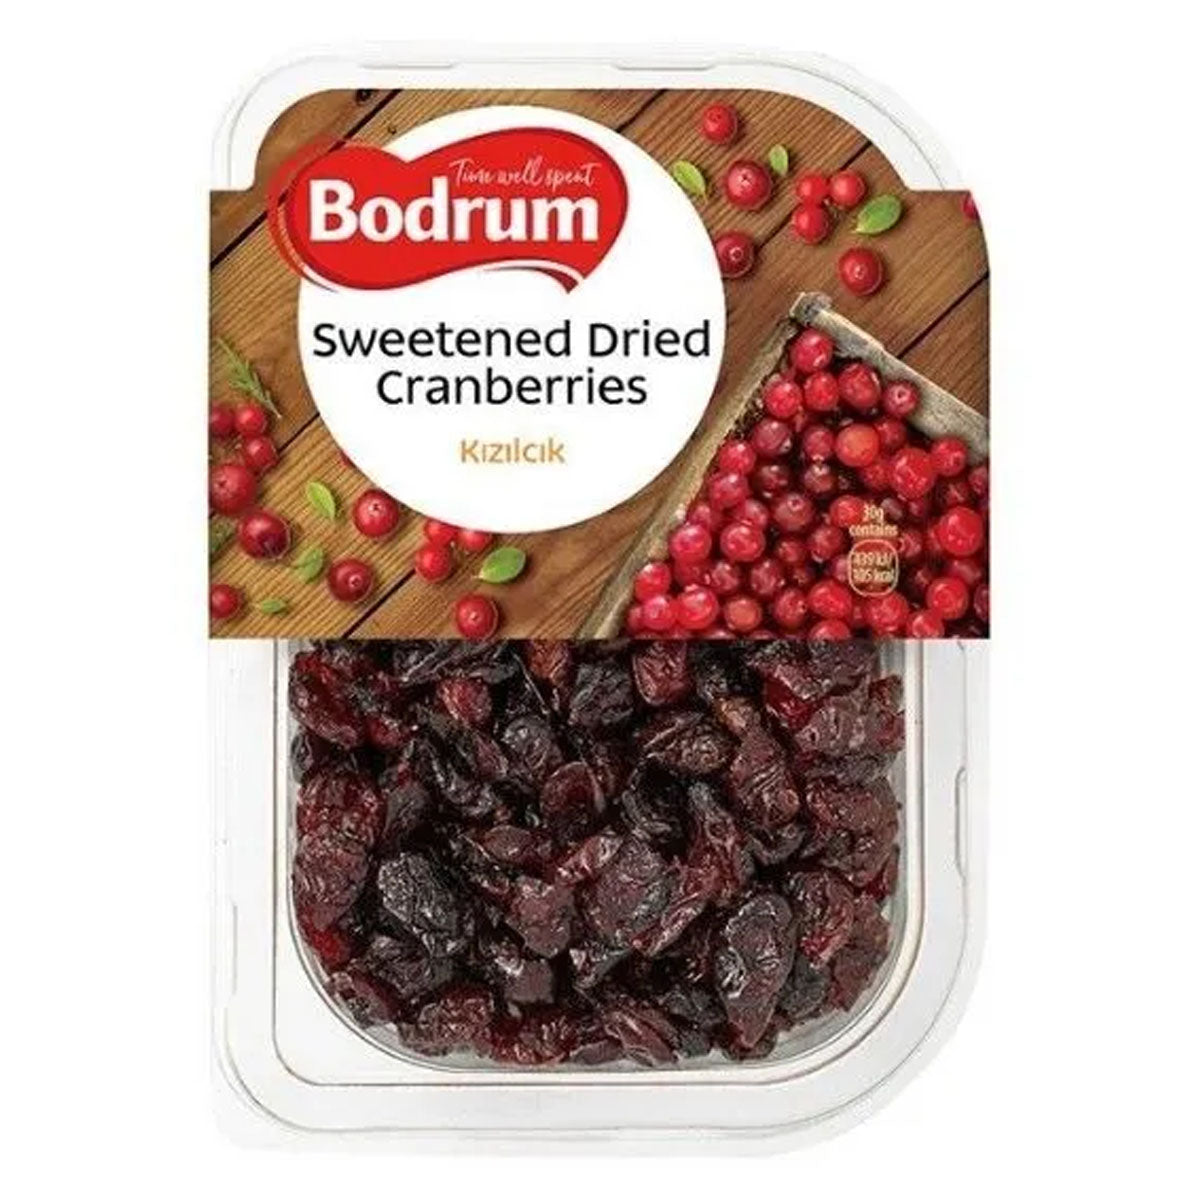 Bodrum - Sweetened Dried Cranberries - 200g - Continental Food Store